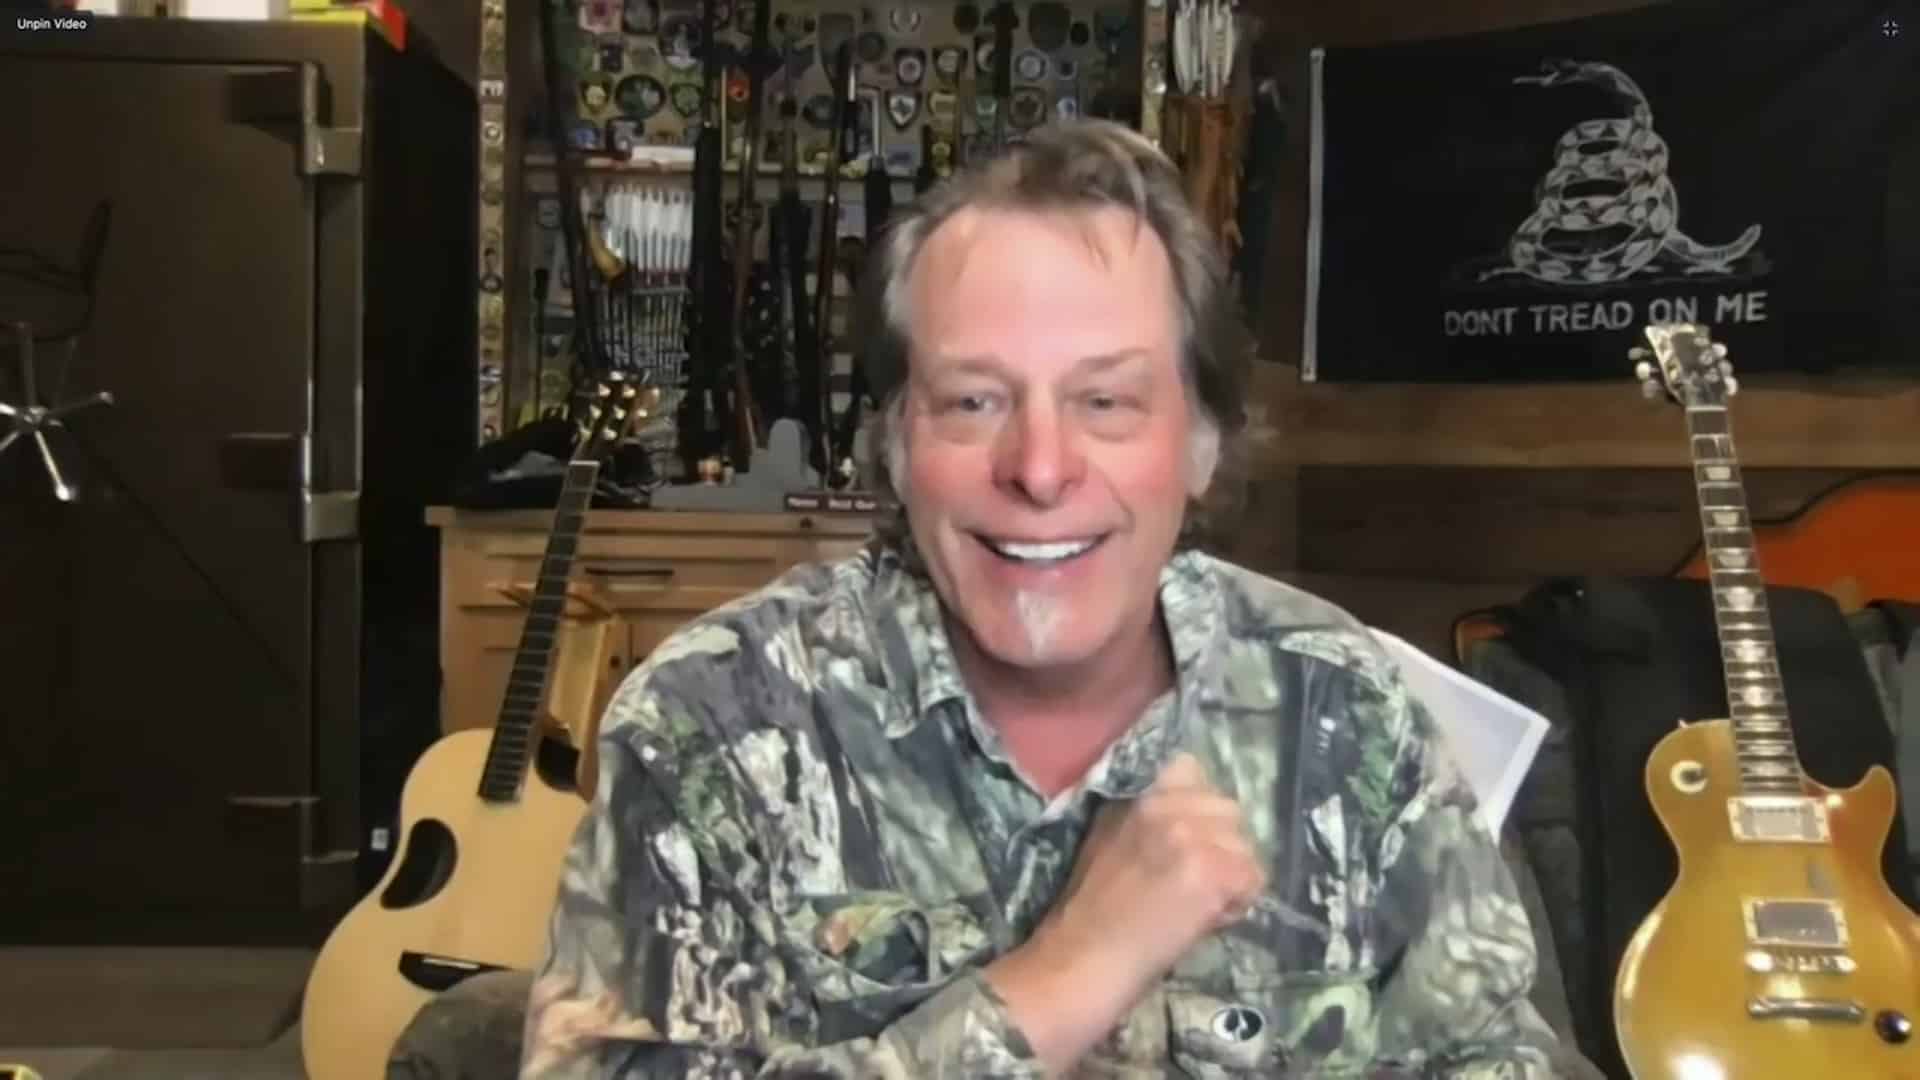 TED NUGENT Says He Sent A Copy Of His Latest ‘Pro-Gun’ Song To President JOE BIDEN